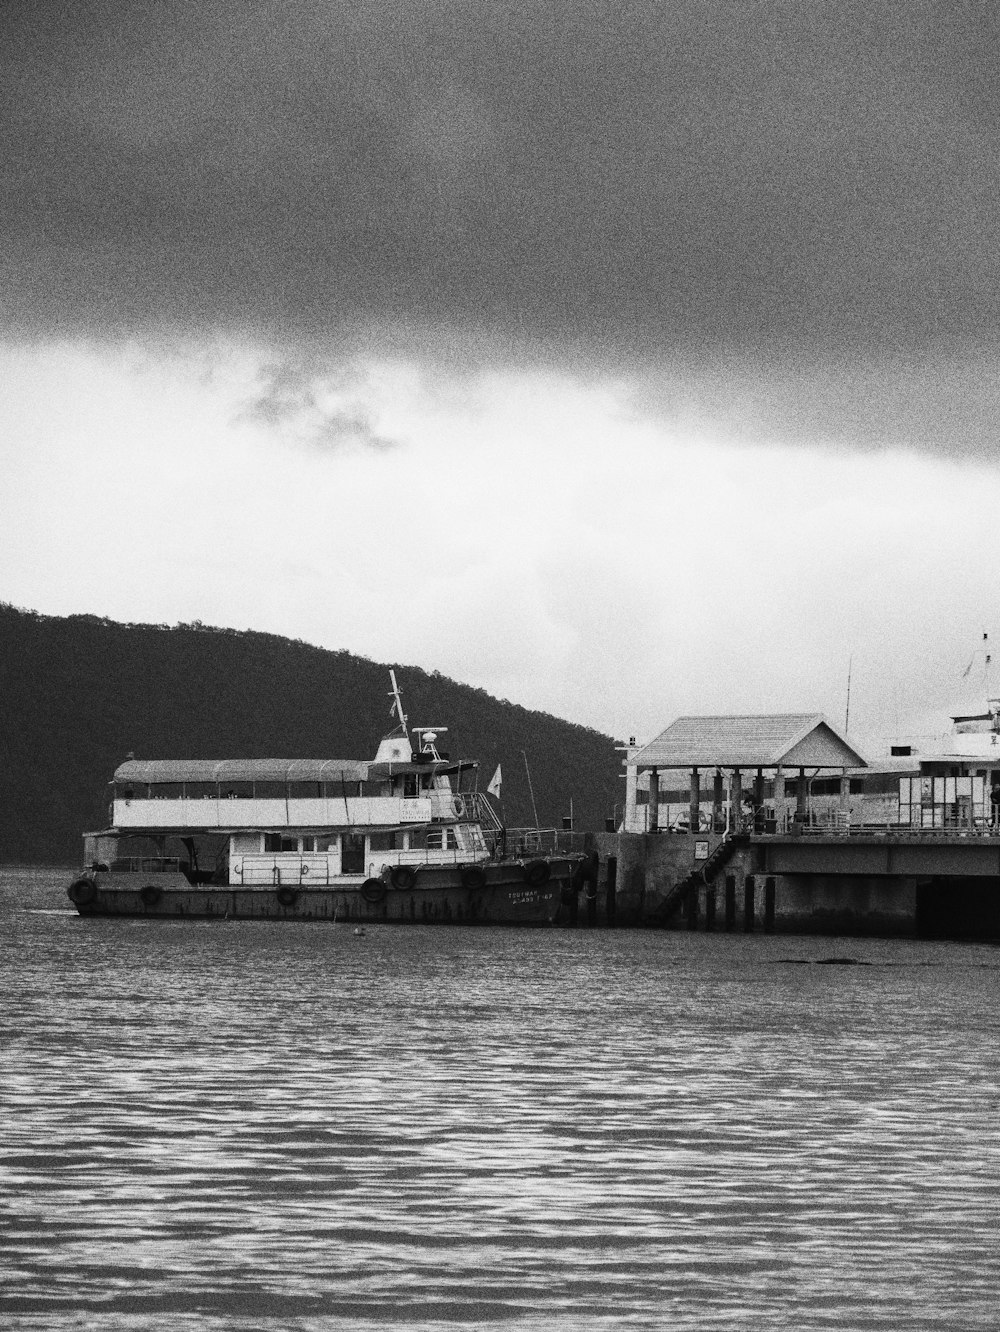 a boat is docked at a pier on a cloudy day